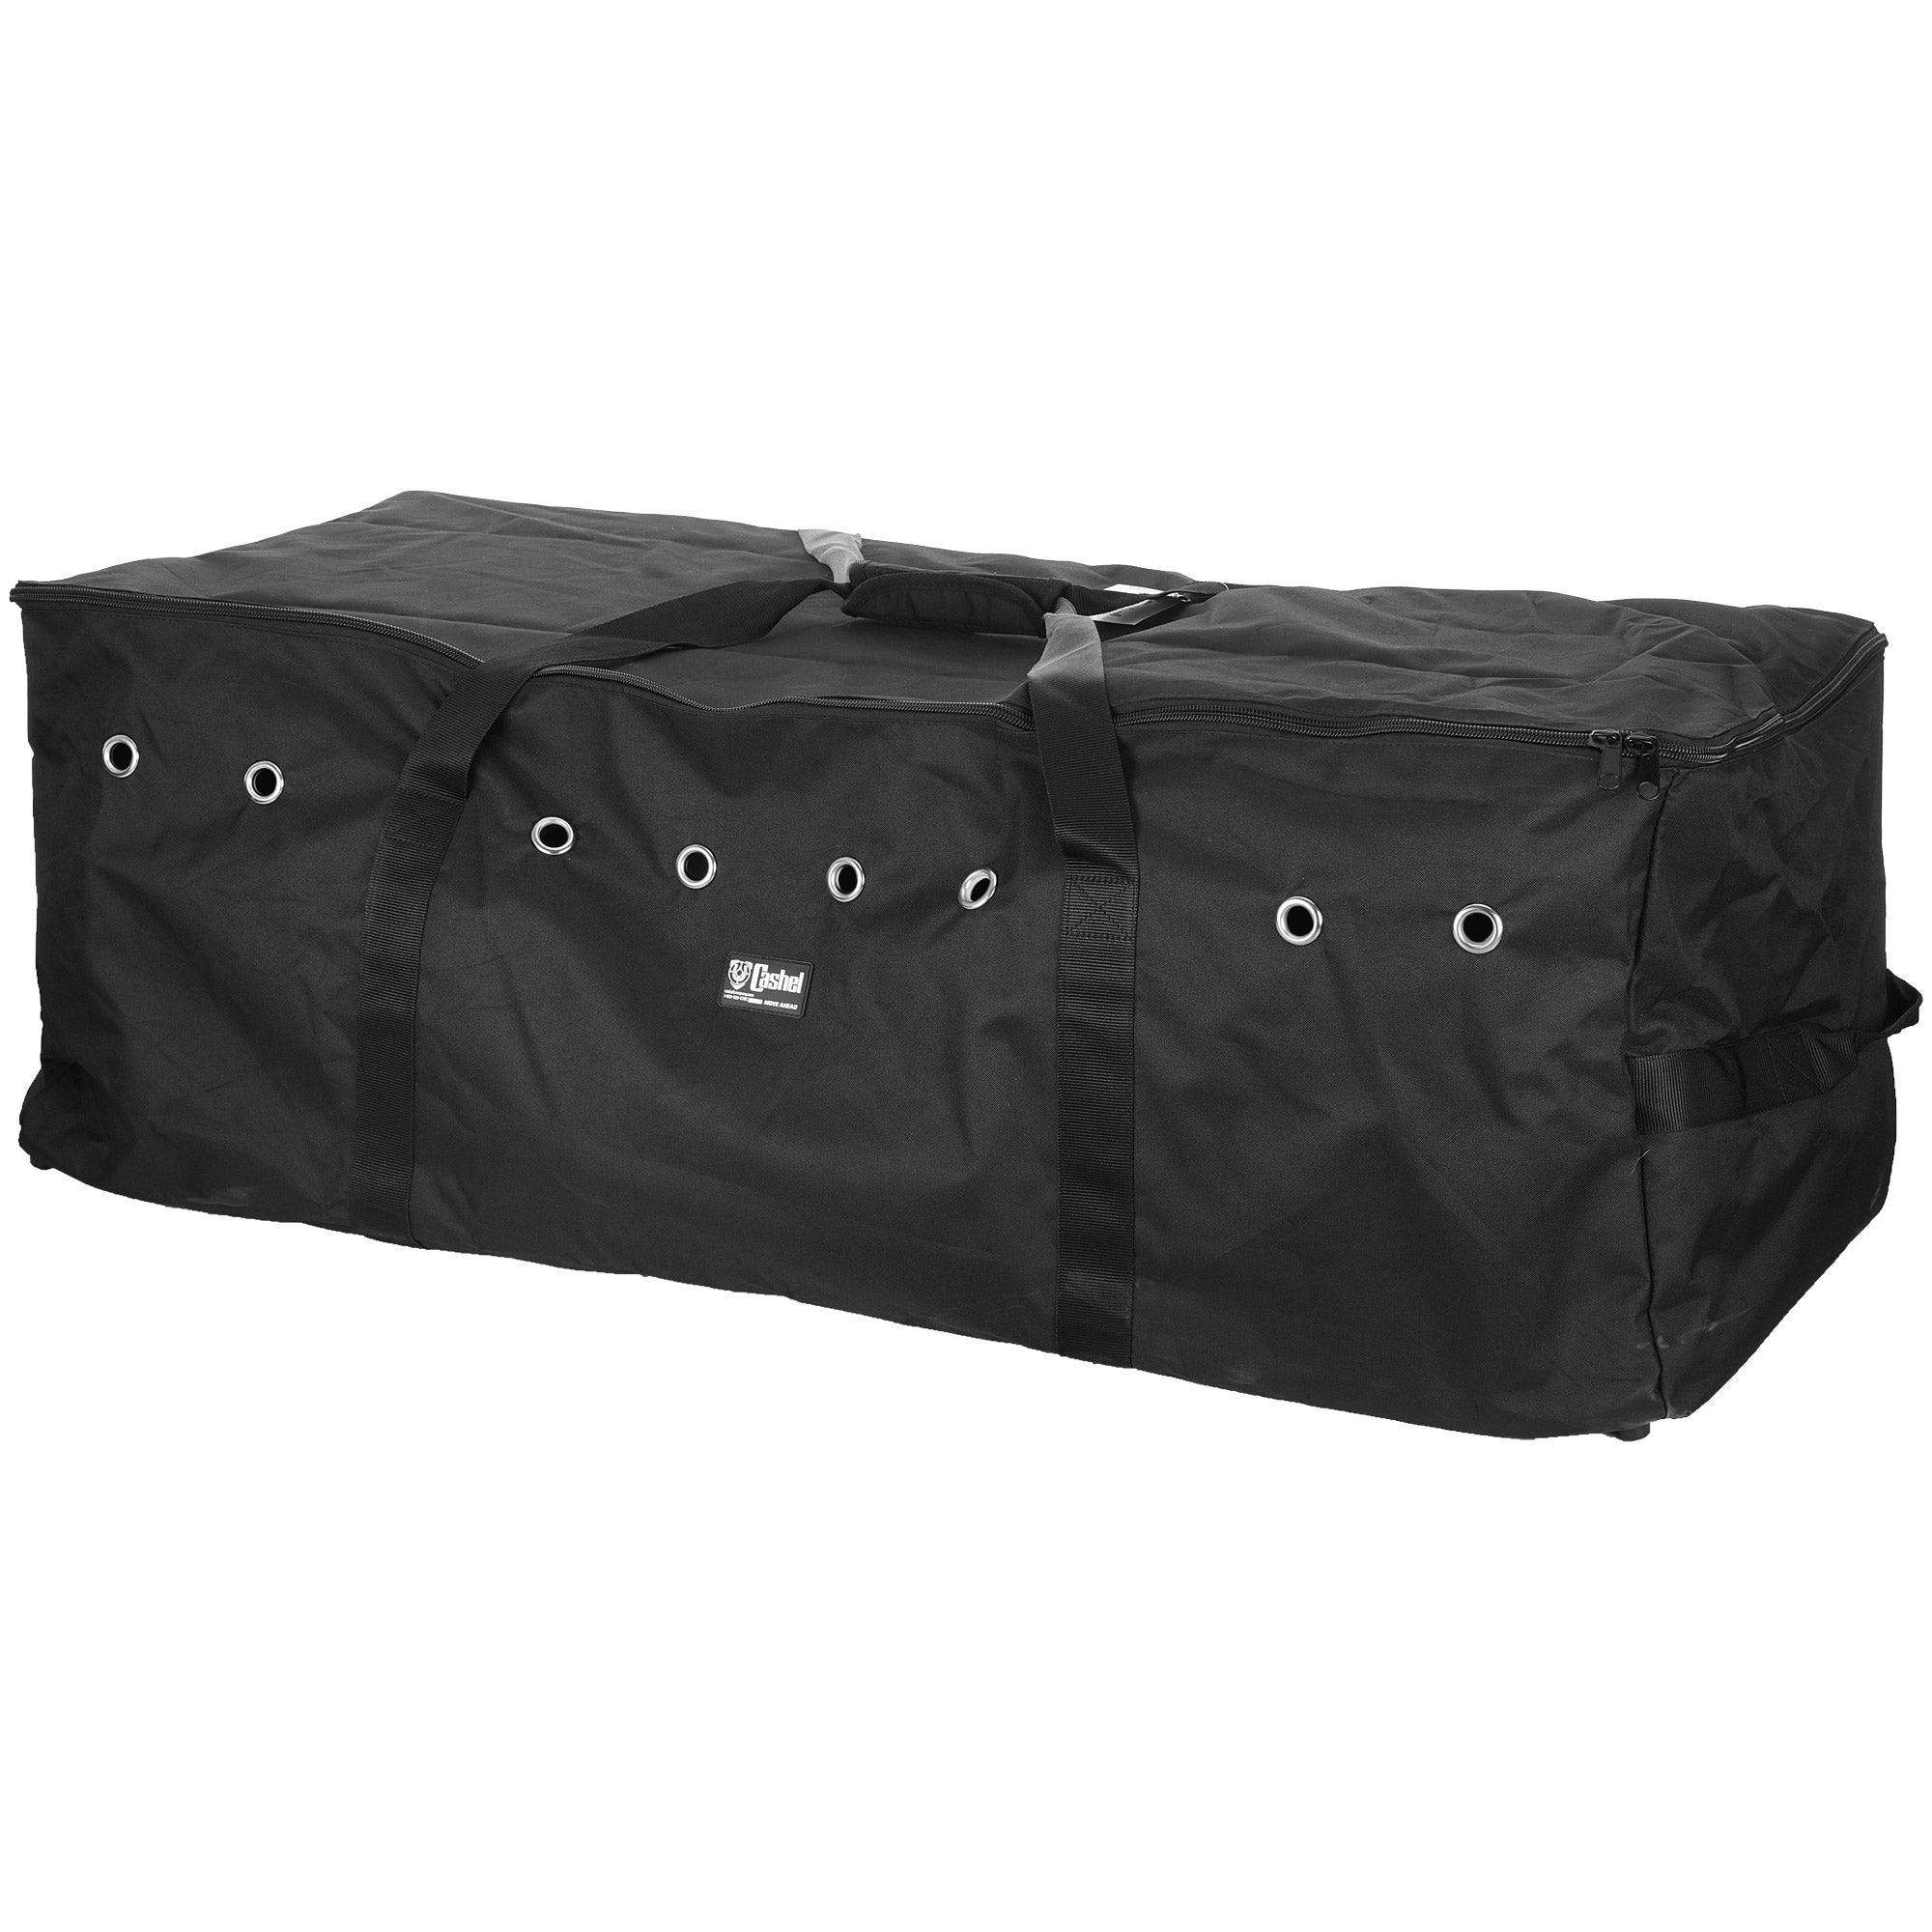 C--BLA Cashel Horse Hay Bale Water Resistant Bag Full Size With Pad Straps Black 